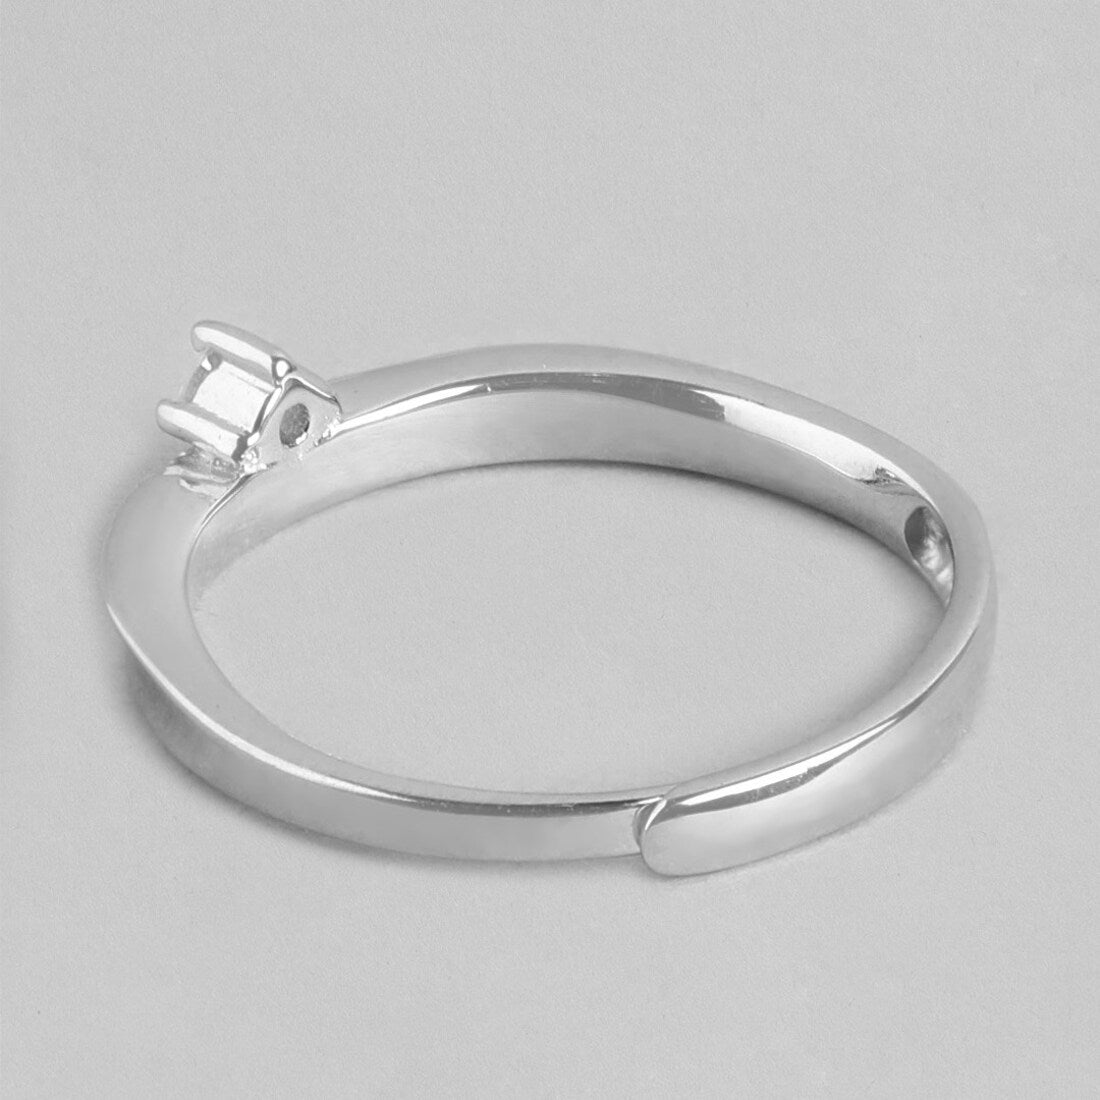 Radiant Simplicity 925 Sterling Silver Female Ring with Cubic Zirconia